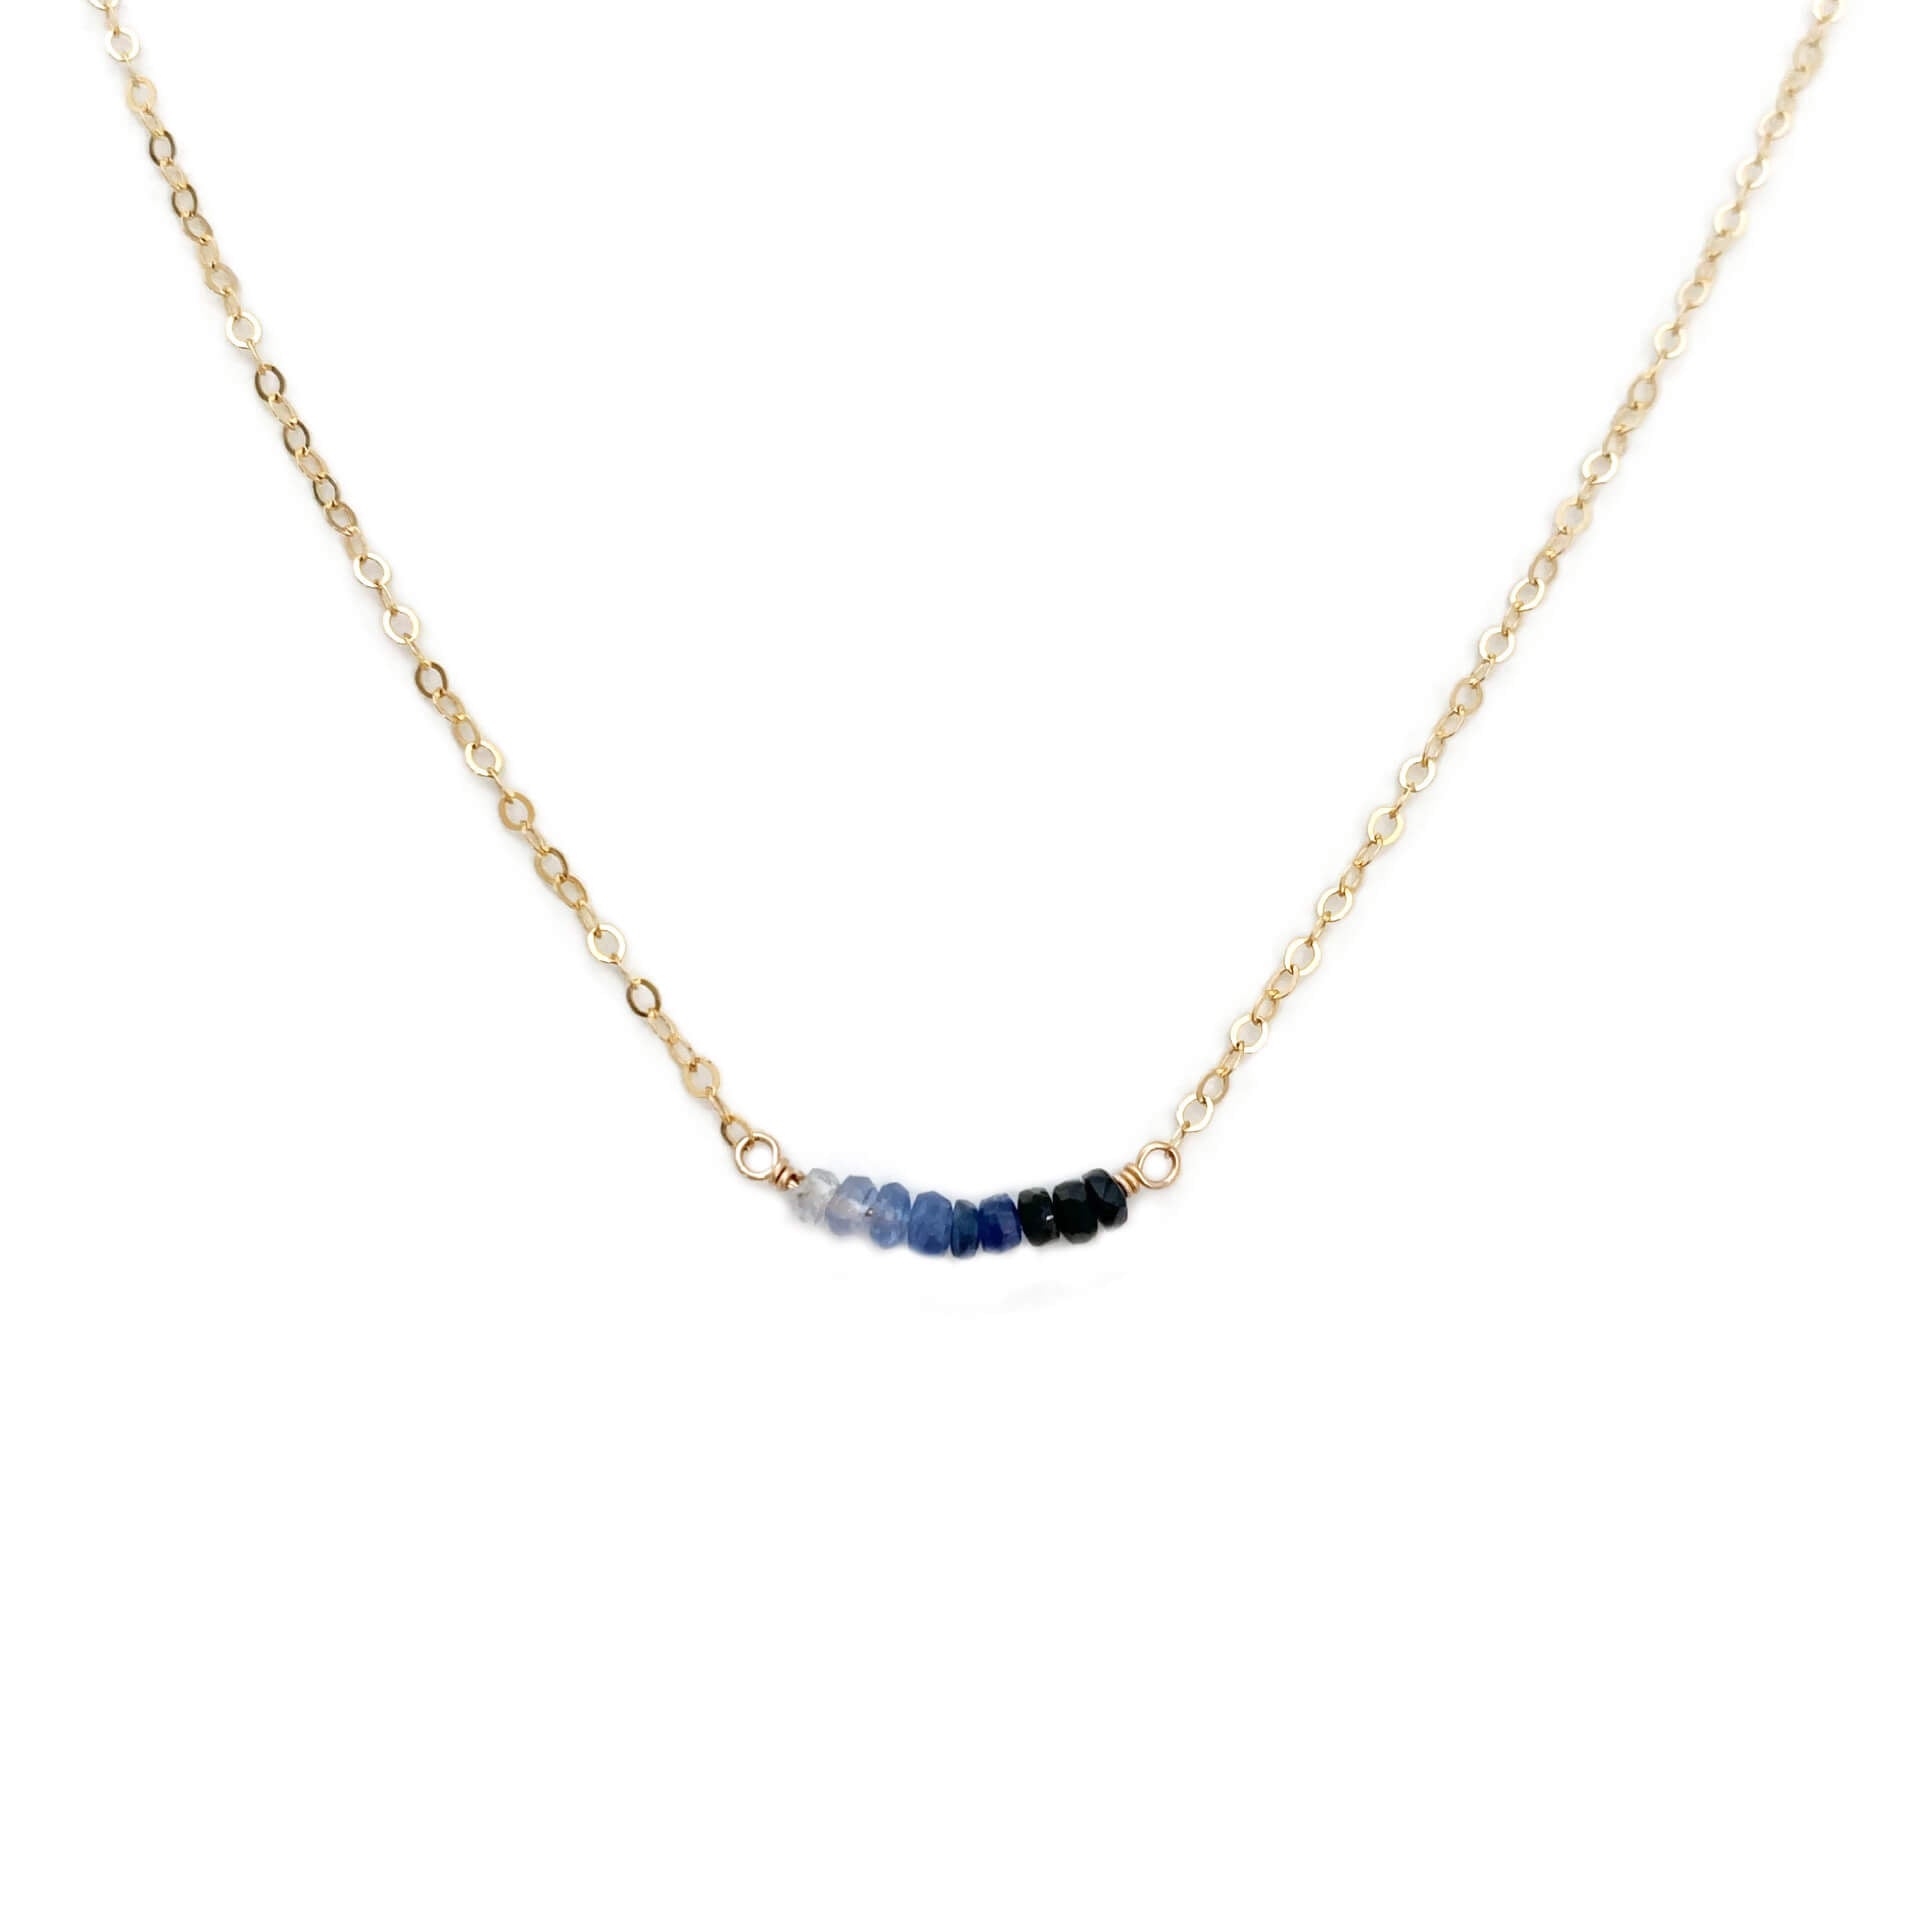 This dainty sapphire necklace is made of genuine sapphire beads and 14k gold chain.  We can make it in sterling silver or gold filled chain with extender. 